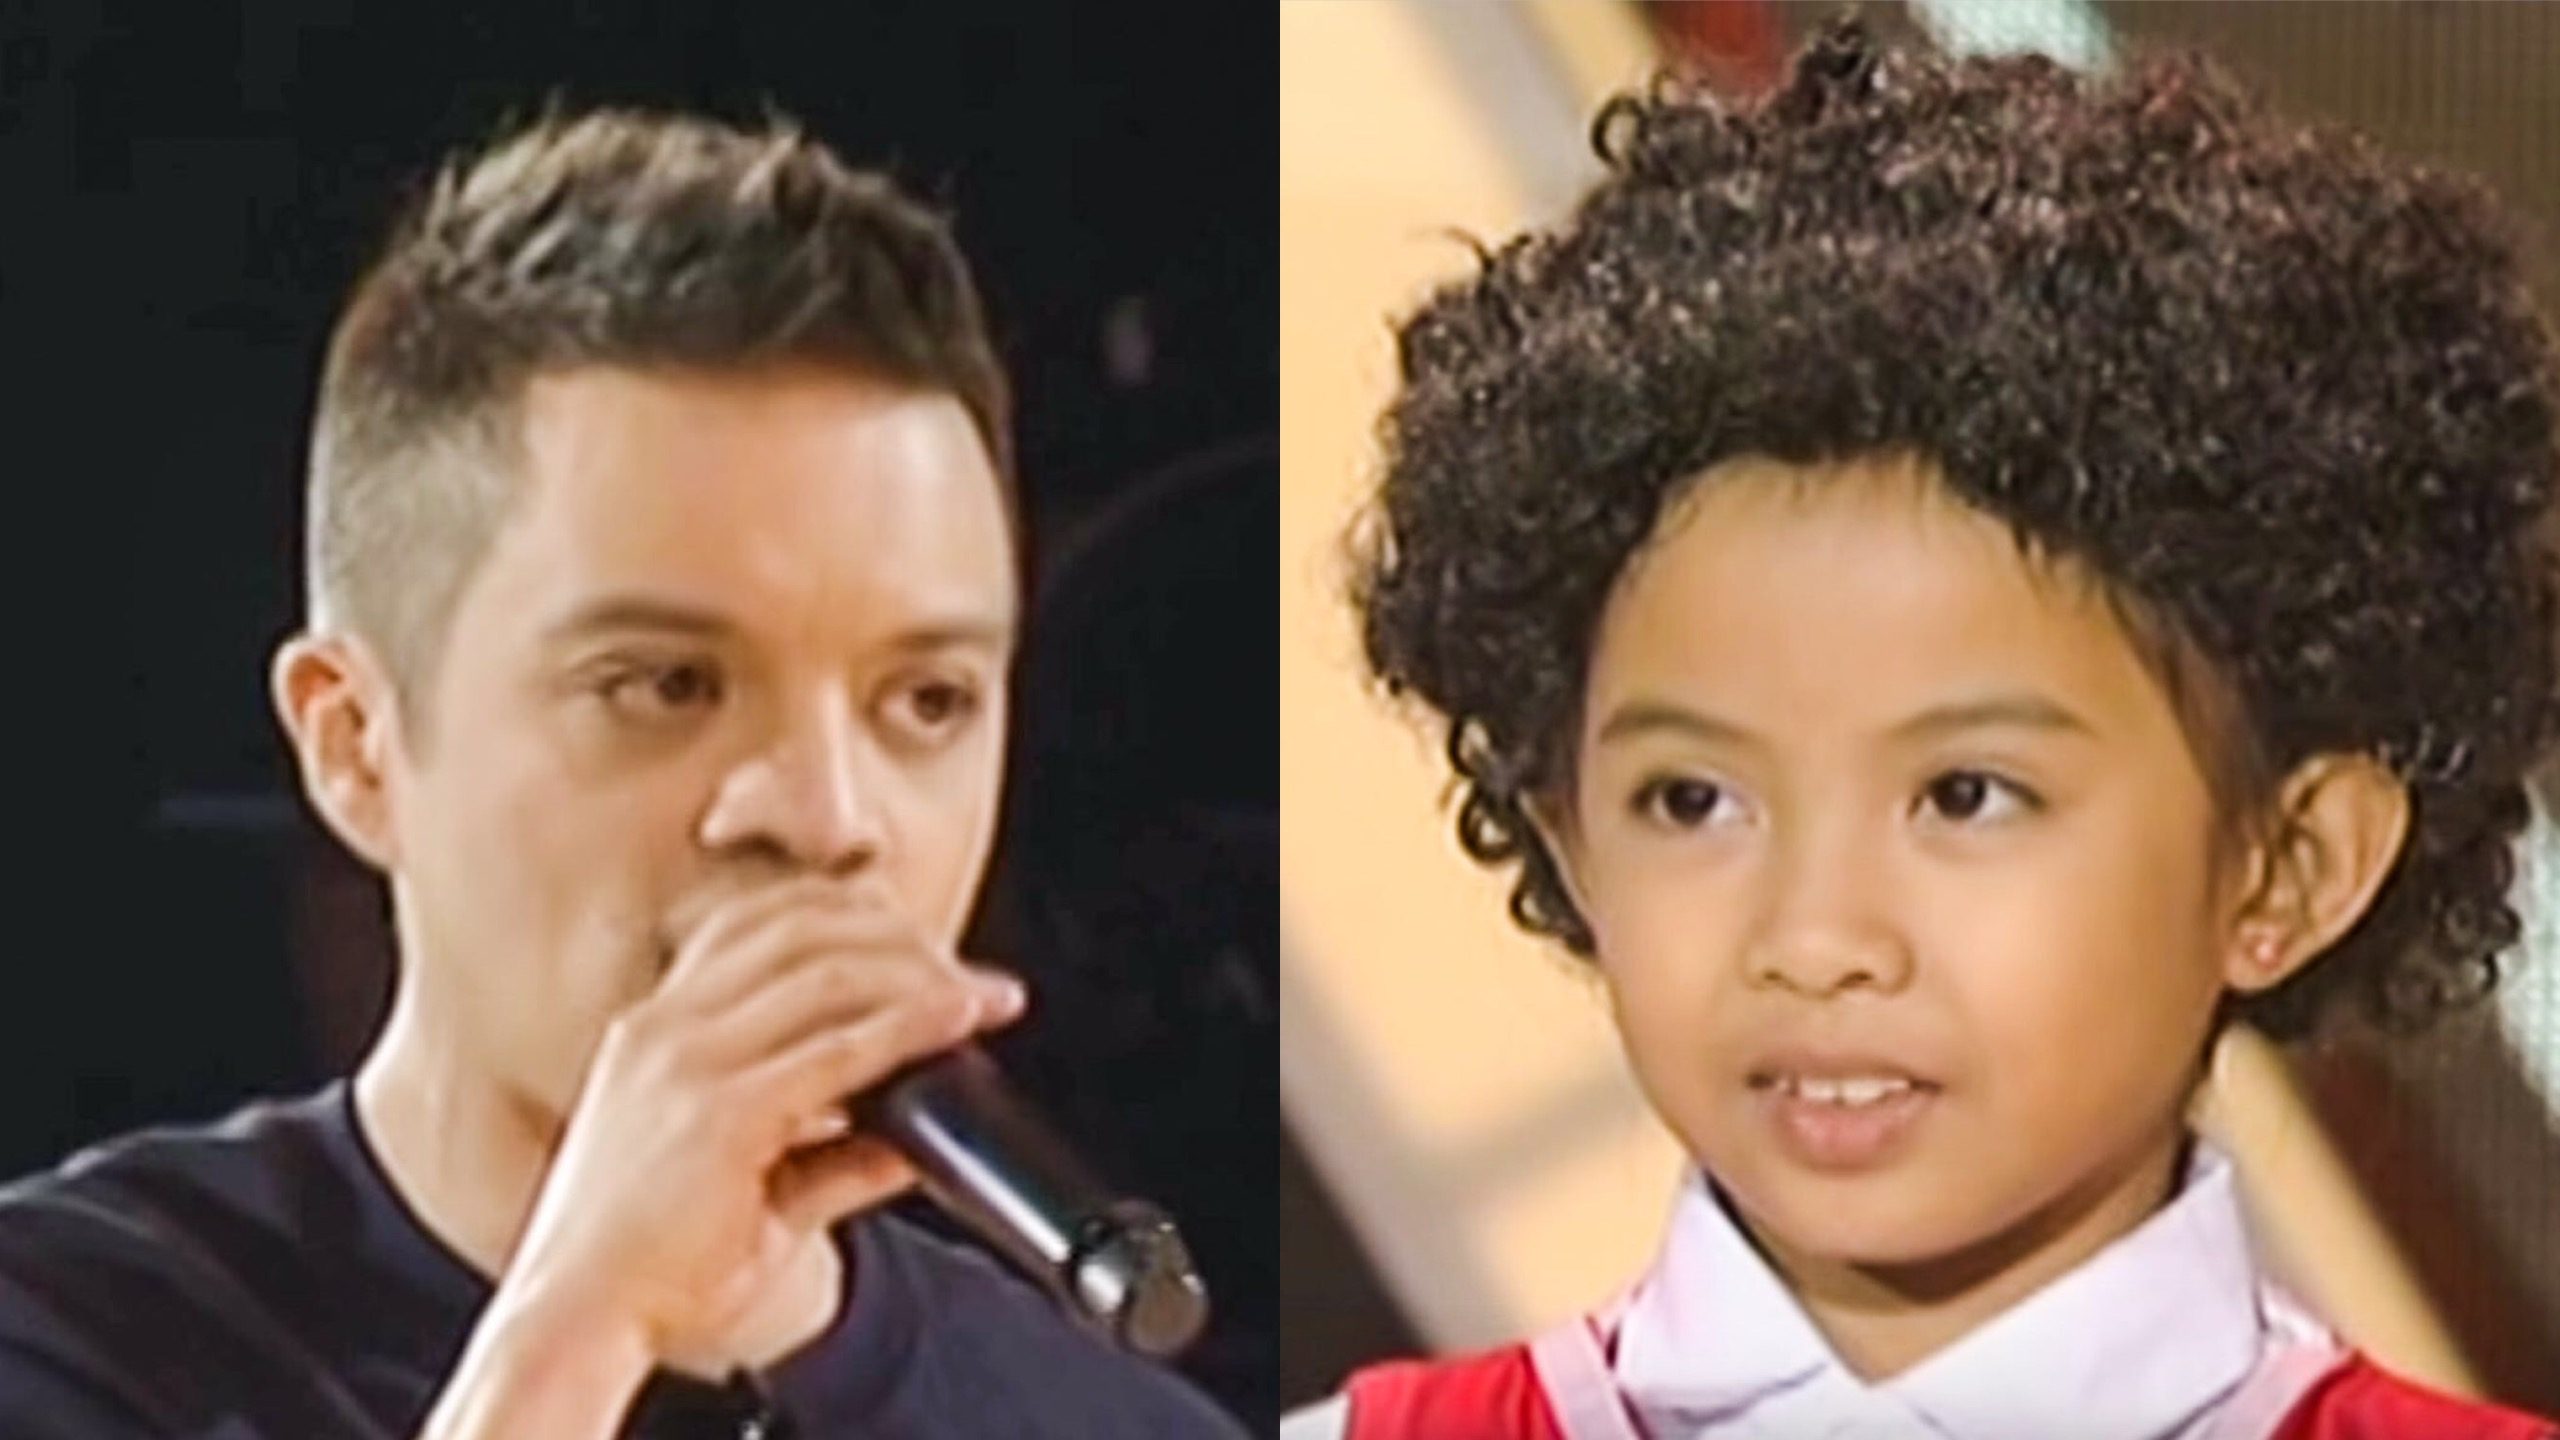 WATCH: Bamboo sings ‘Tomorrow’ from ‘Annie’ on ‘Voice Kids’